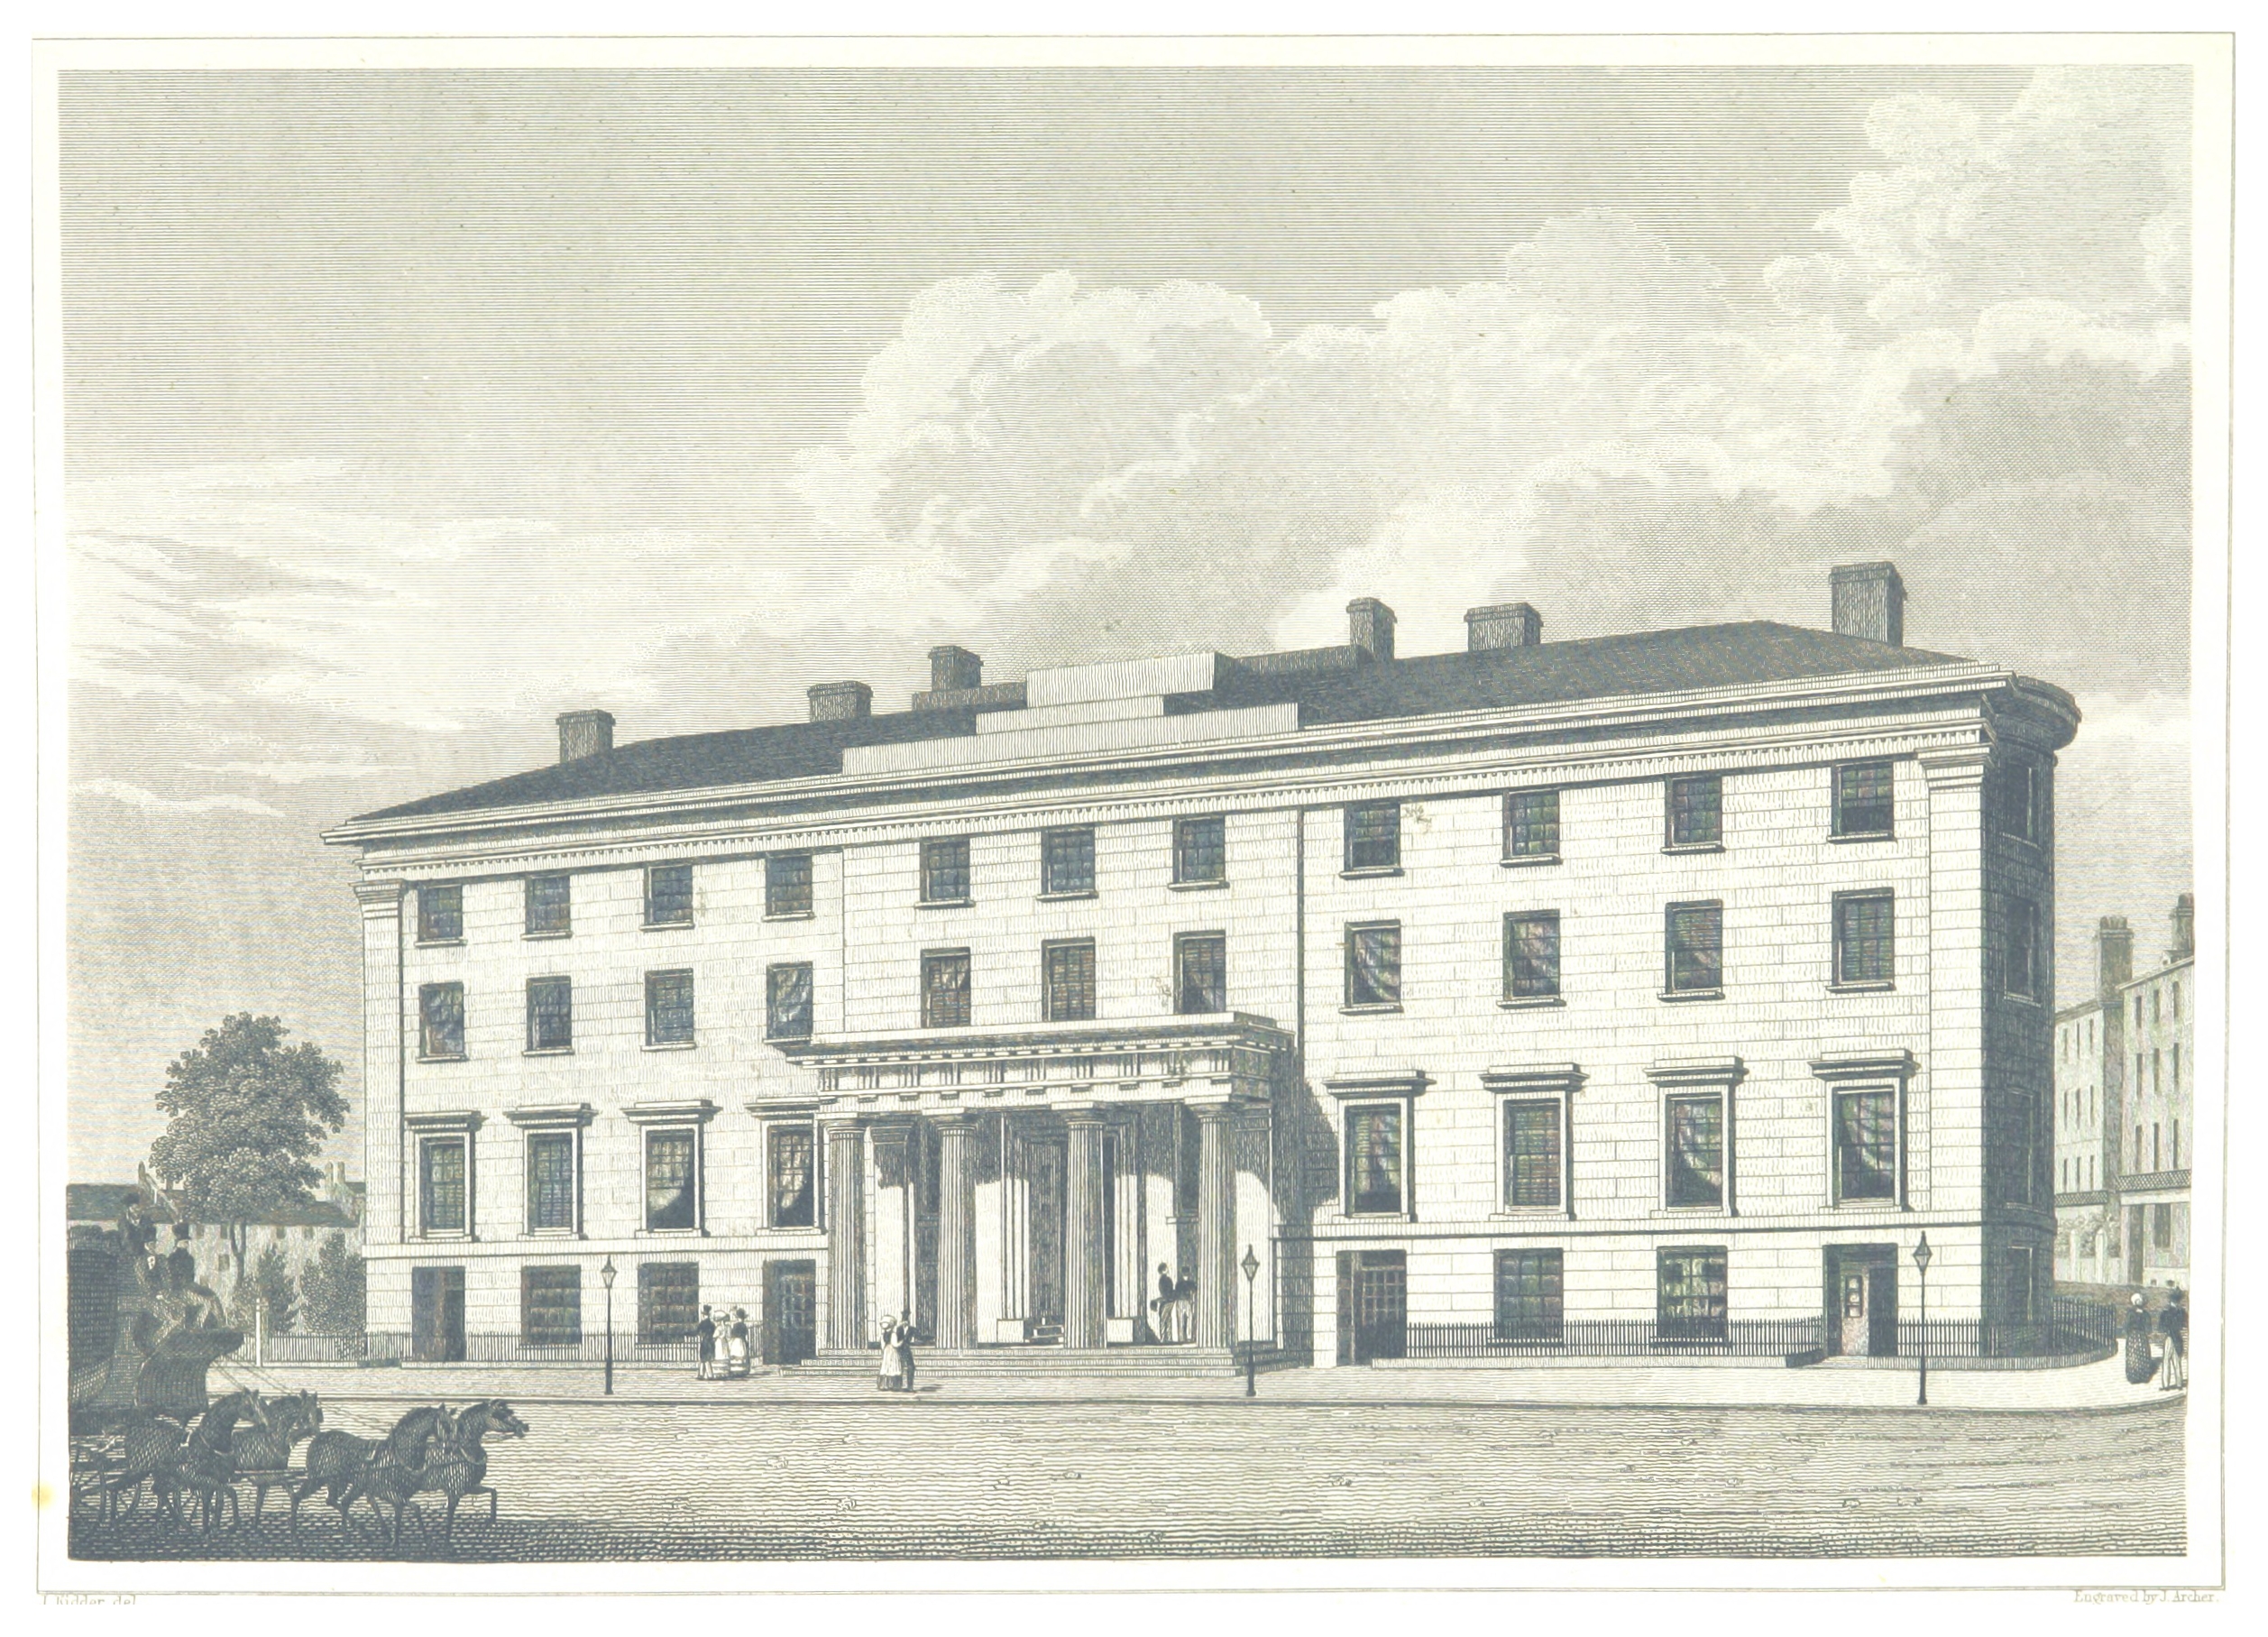 The Birth of the Hotel Business - The Tremont House was a four-story, granite-faced, neoclassical building, located at the corner of Tremont and Beacon Streets, with its main entrance on Tremont. It incorporated many hotel "firsts"